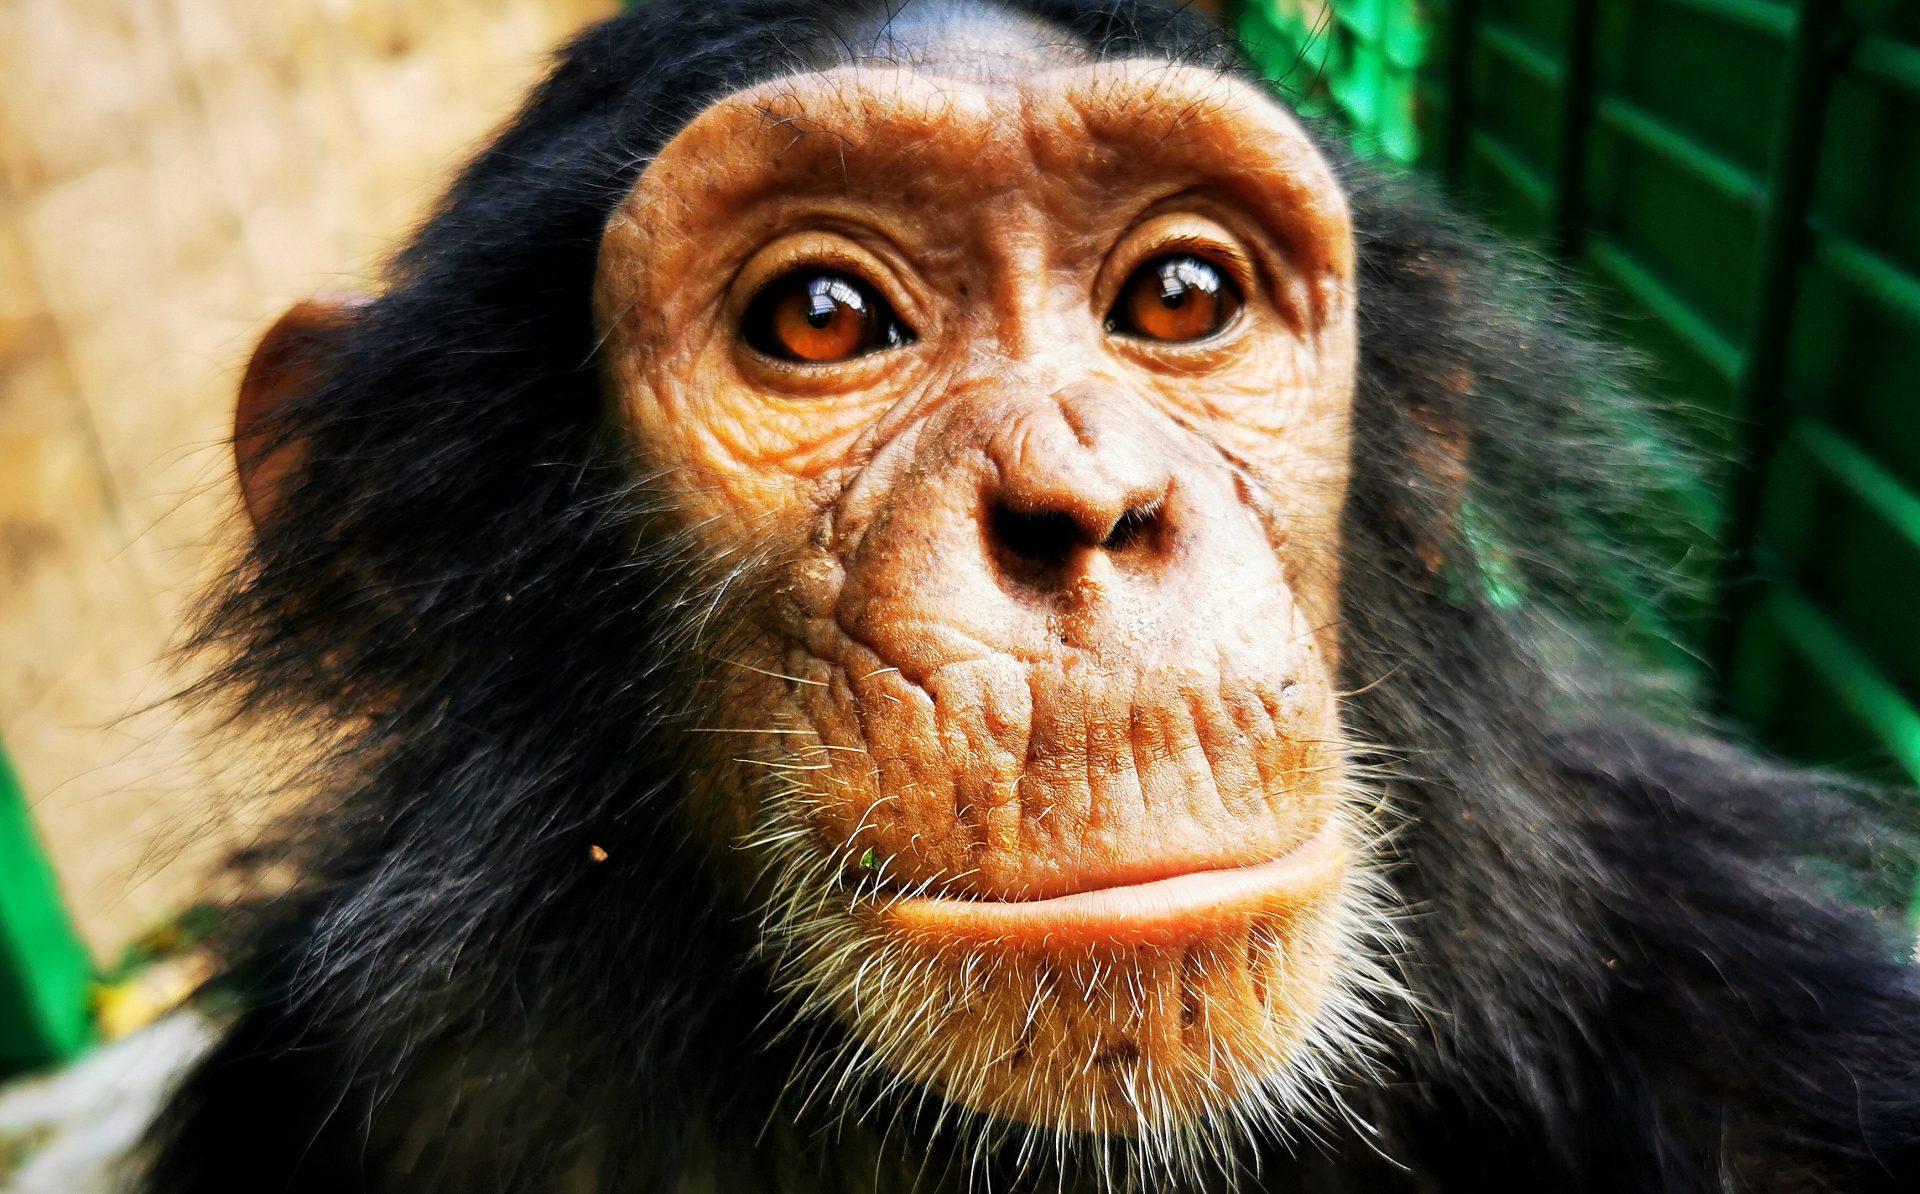 Tongo, the chimp seized in the Virunga area and who arrived at J.A.C.K. by plane